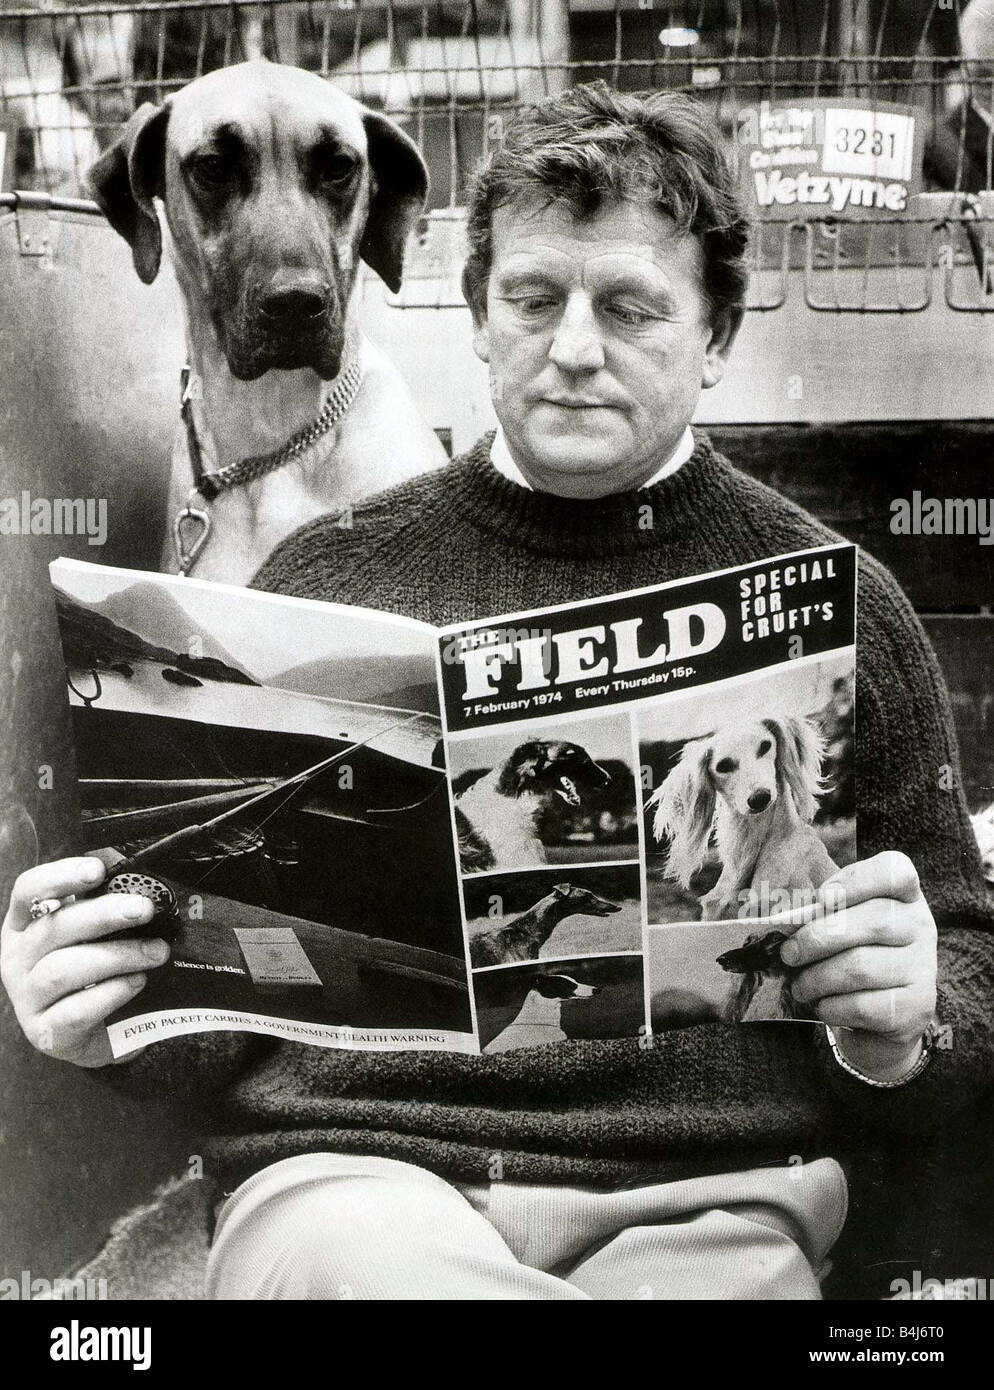 Crufts Dog show opened this morning in Olympia London Competitor Thomas Humphrey checks the form with his mut Liza the Great Dane A man reading with a dog looking over shoulder Field Magazine February 1974 Stock Photo